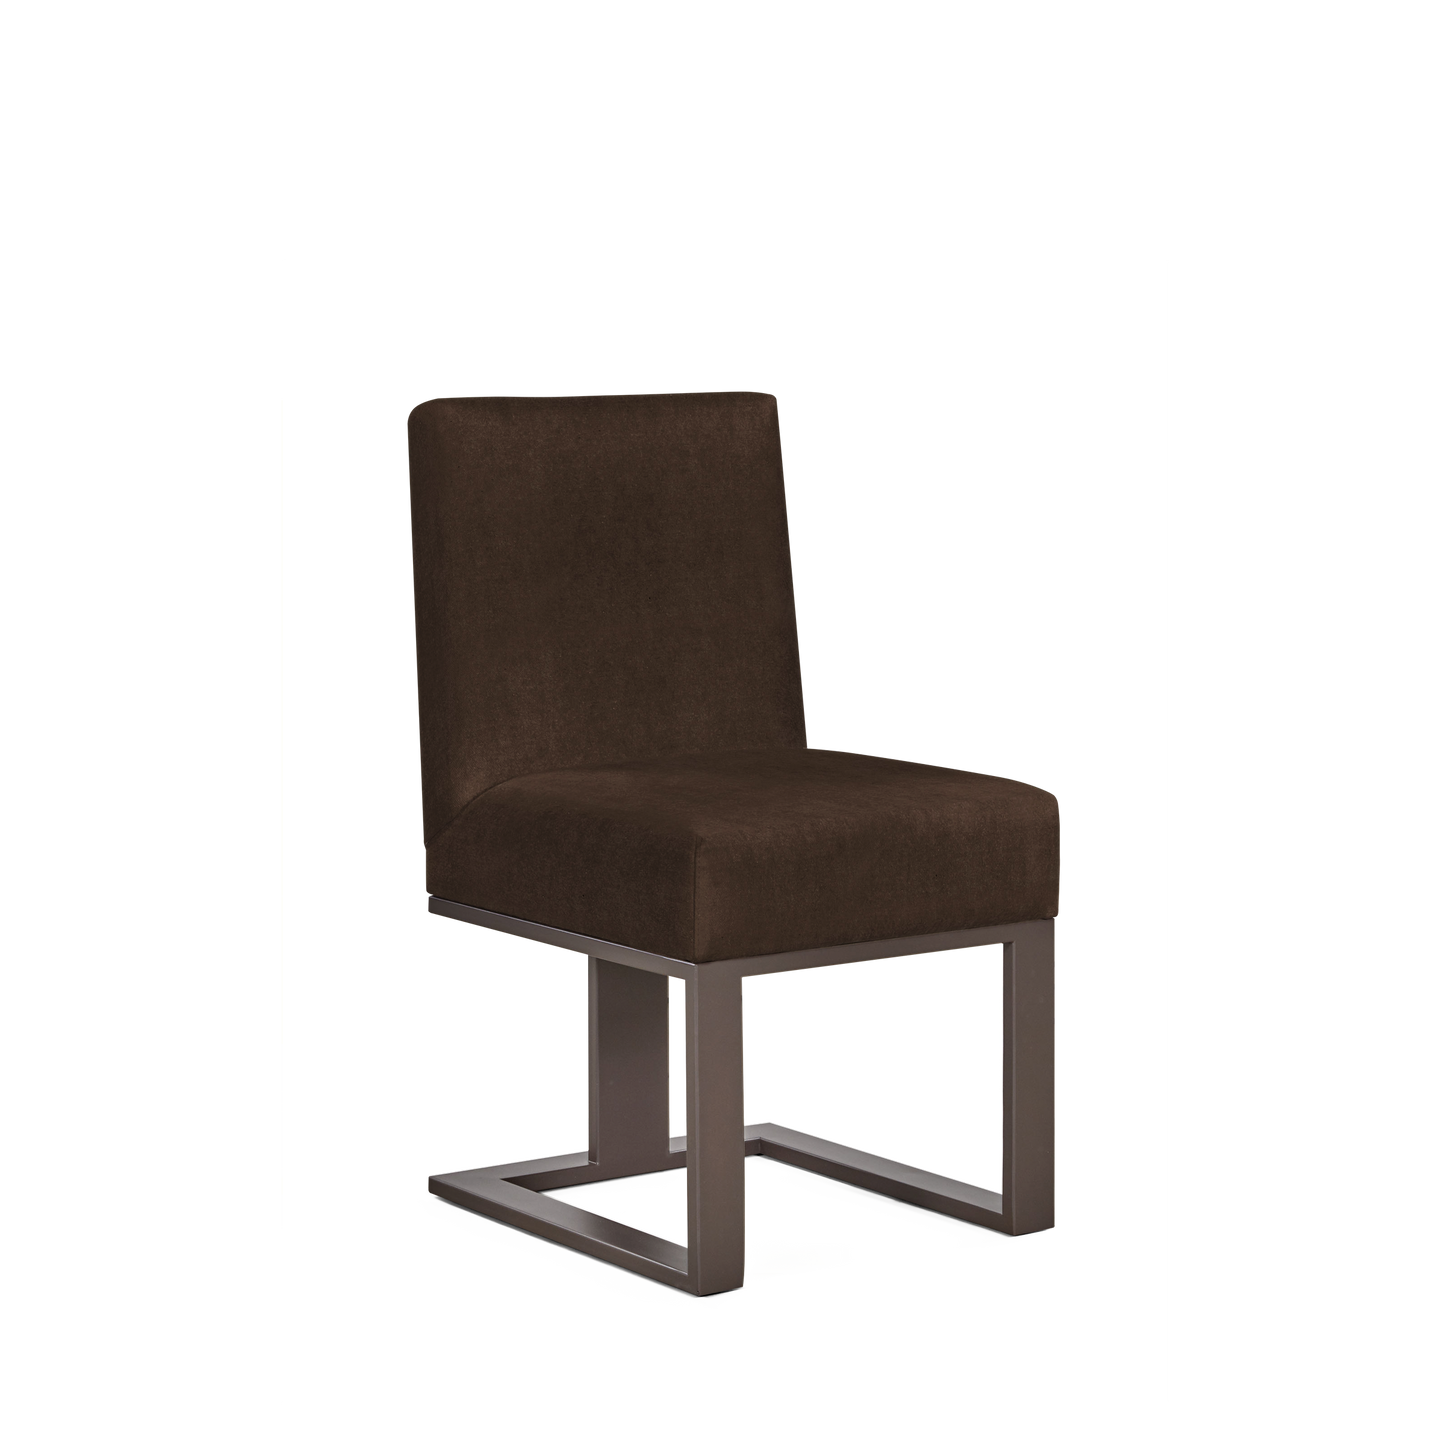 Len chair with suede brown textile and moka wood legs 